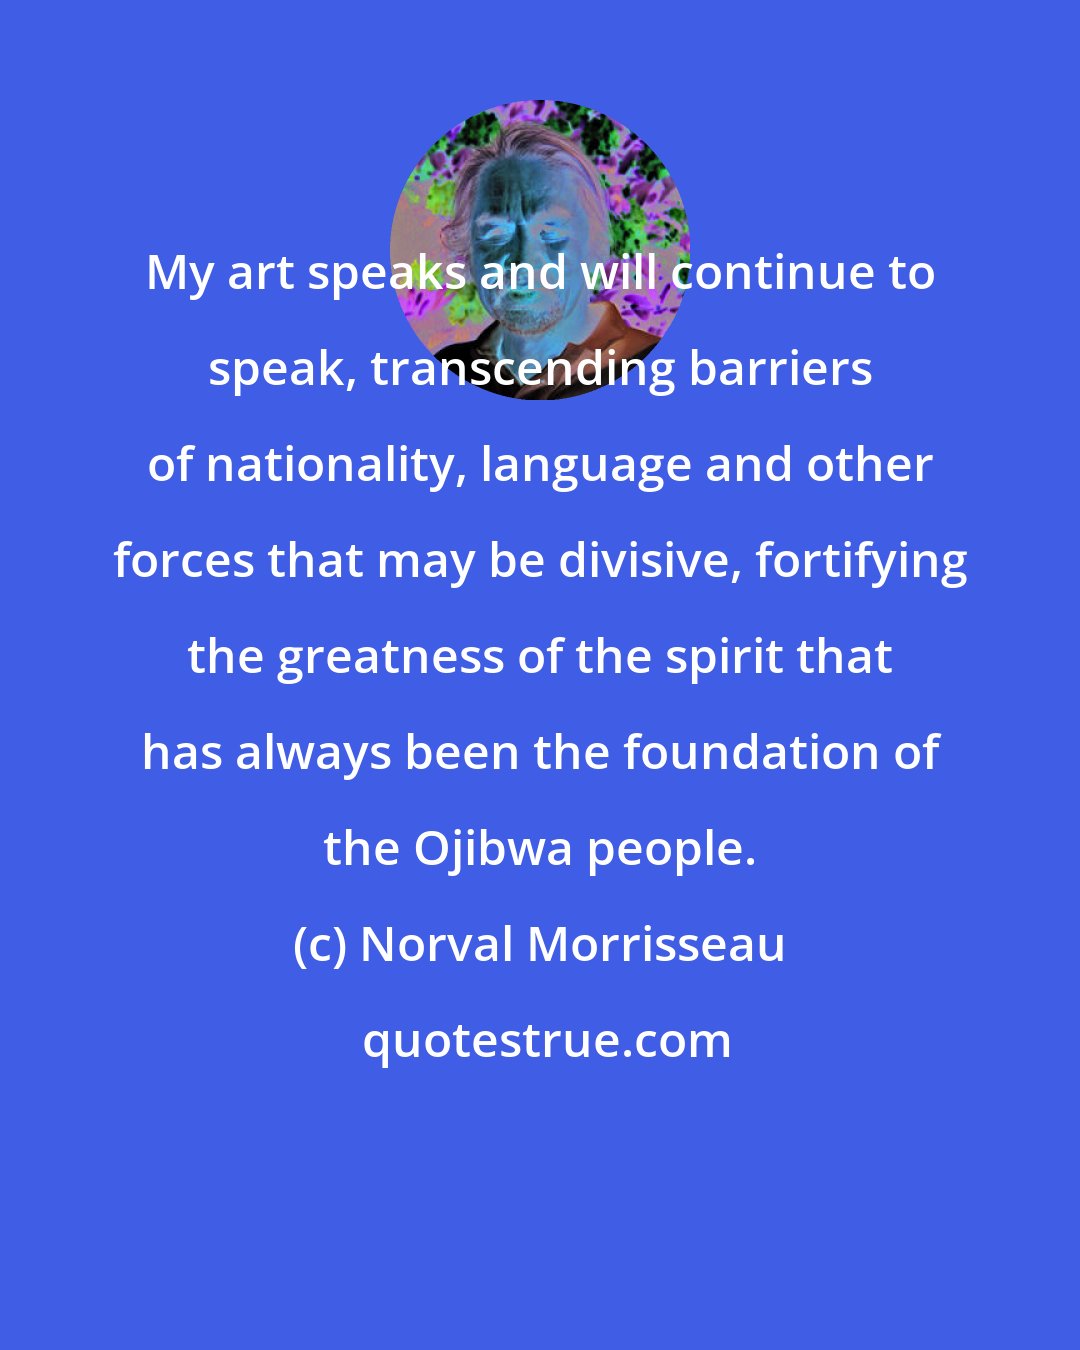 Norval Morrisseau: My art speaks and will continue to speak, transcending barriers of nationality, language and other forces that may be divisive, fortifying the greatness of the spirit that has always been the foundation of the Ojibwa people.